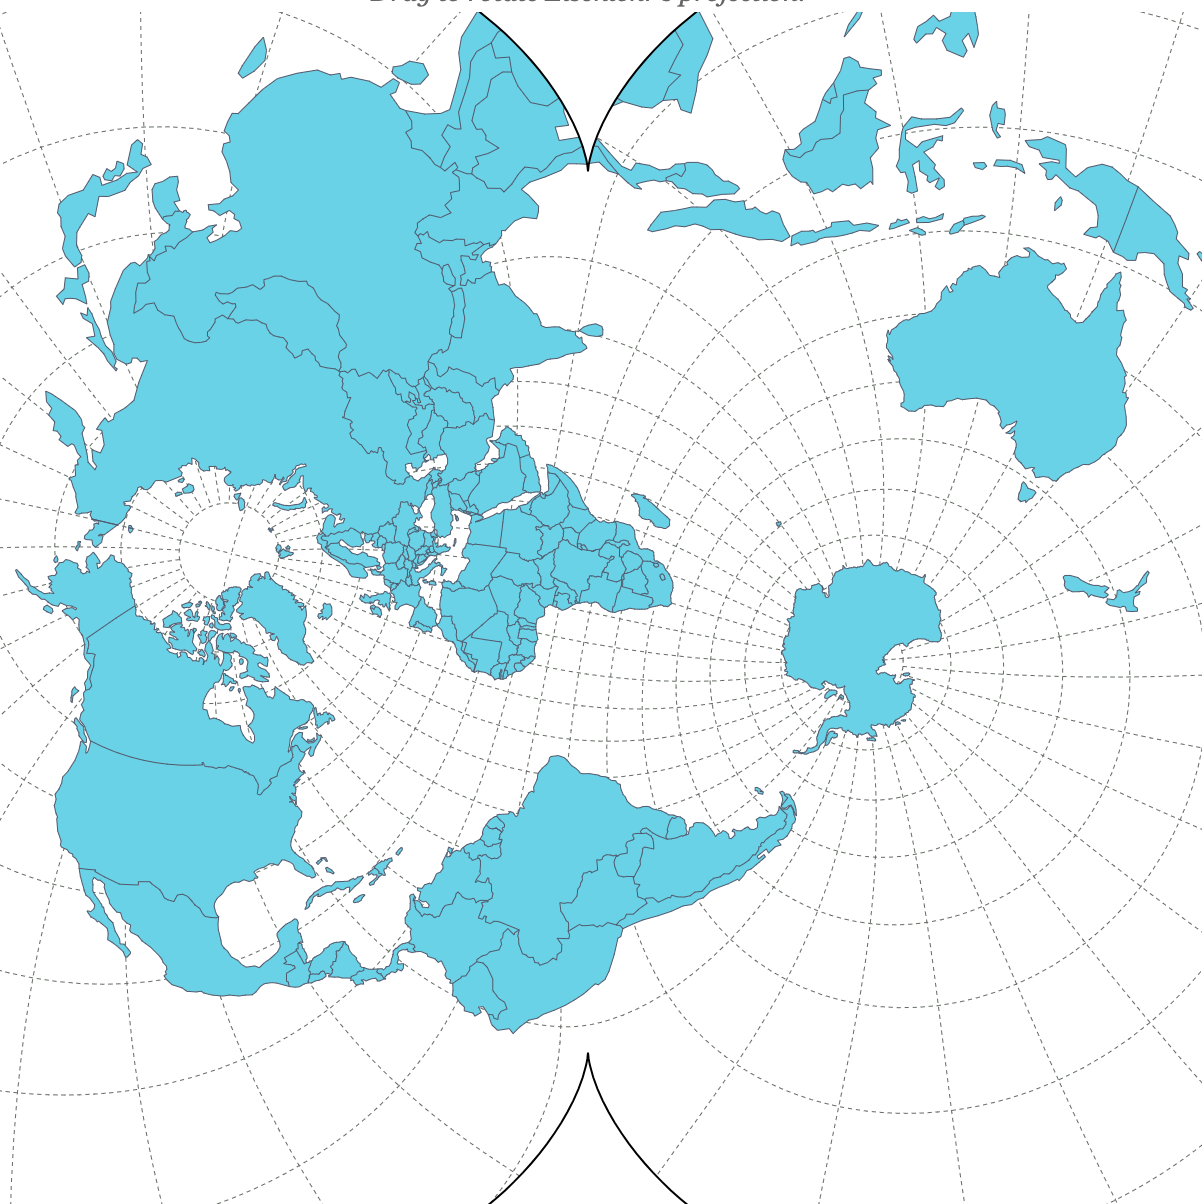 A stylized map displaying the northern hemisphere in a polar projection, highlighting countries in various shades of blue, with a grid overlay and latitude lines. The map also includes markers for eSimFone.com's Global (130+ areas) travel eSIM availability.